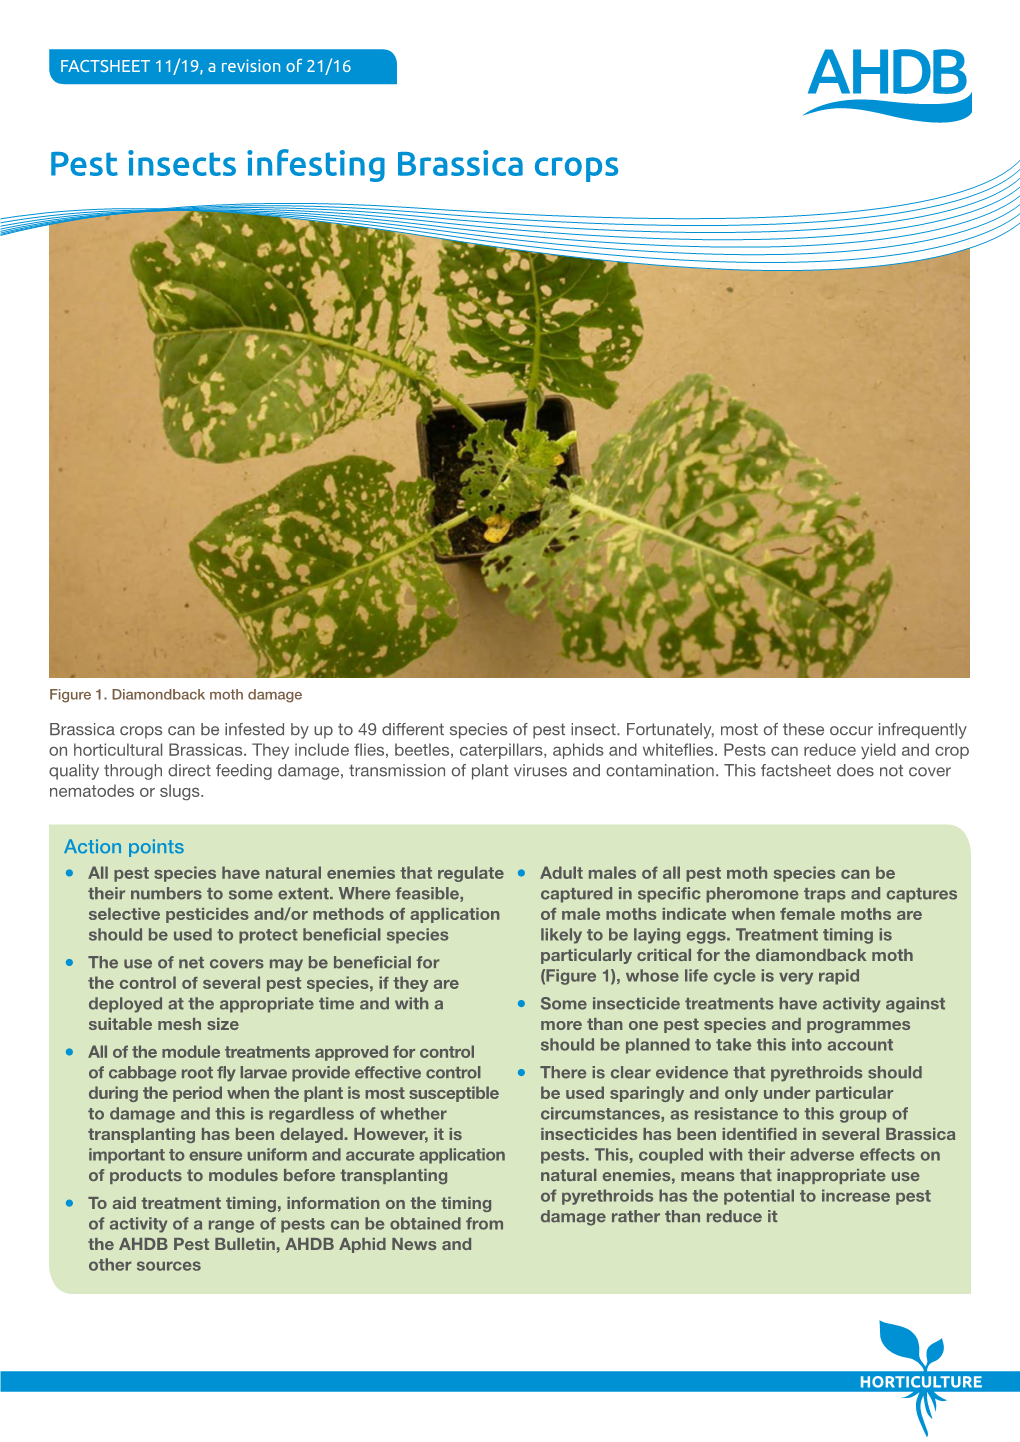 Pest Insects Infesting Brassica Crops